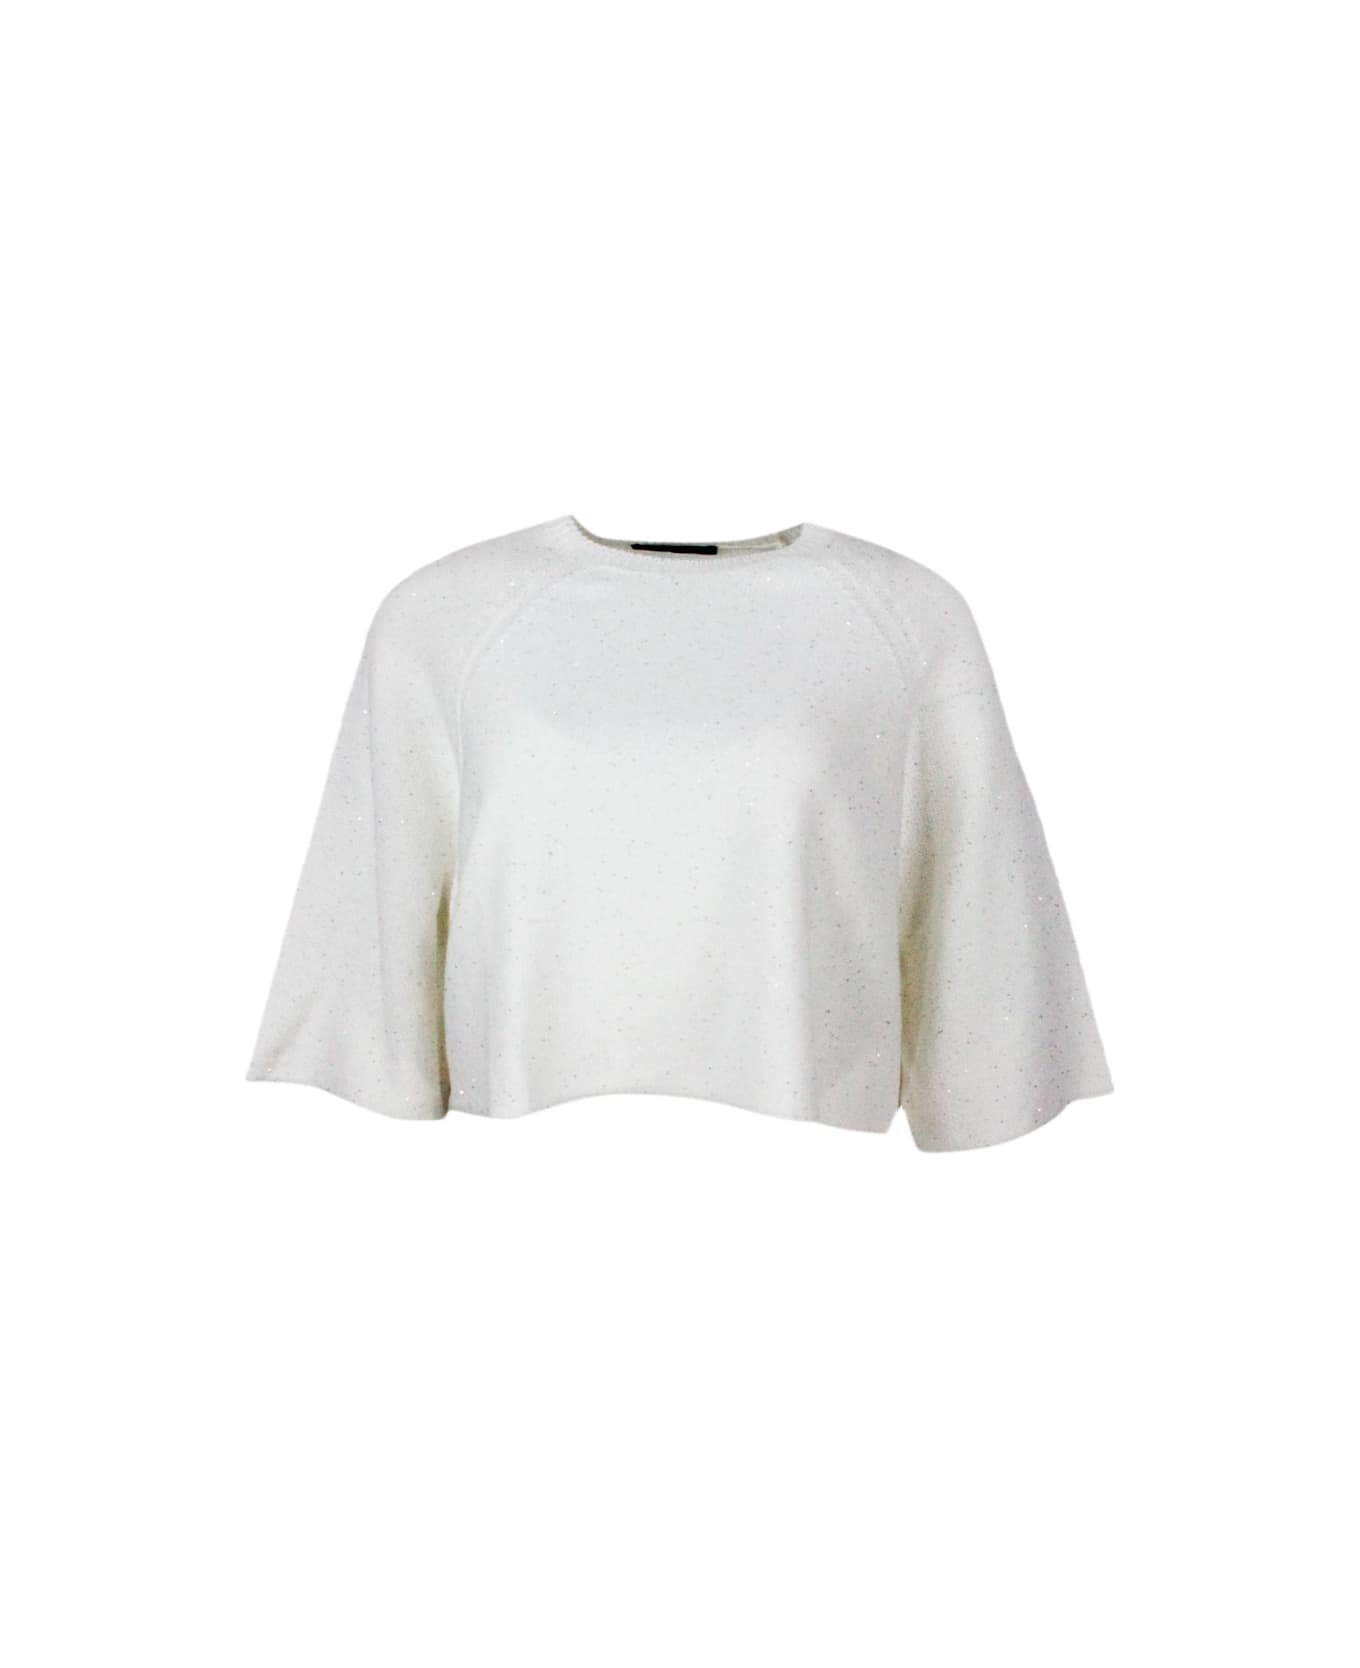 Fabiana Filippi Cape, Crew-neck And Half-sleeved Sweater In Cotton And Linen - Bianco ニットウェア